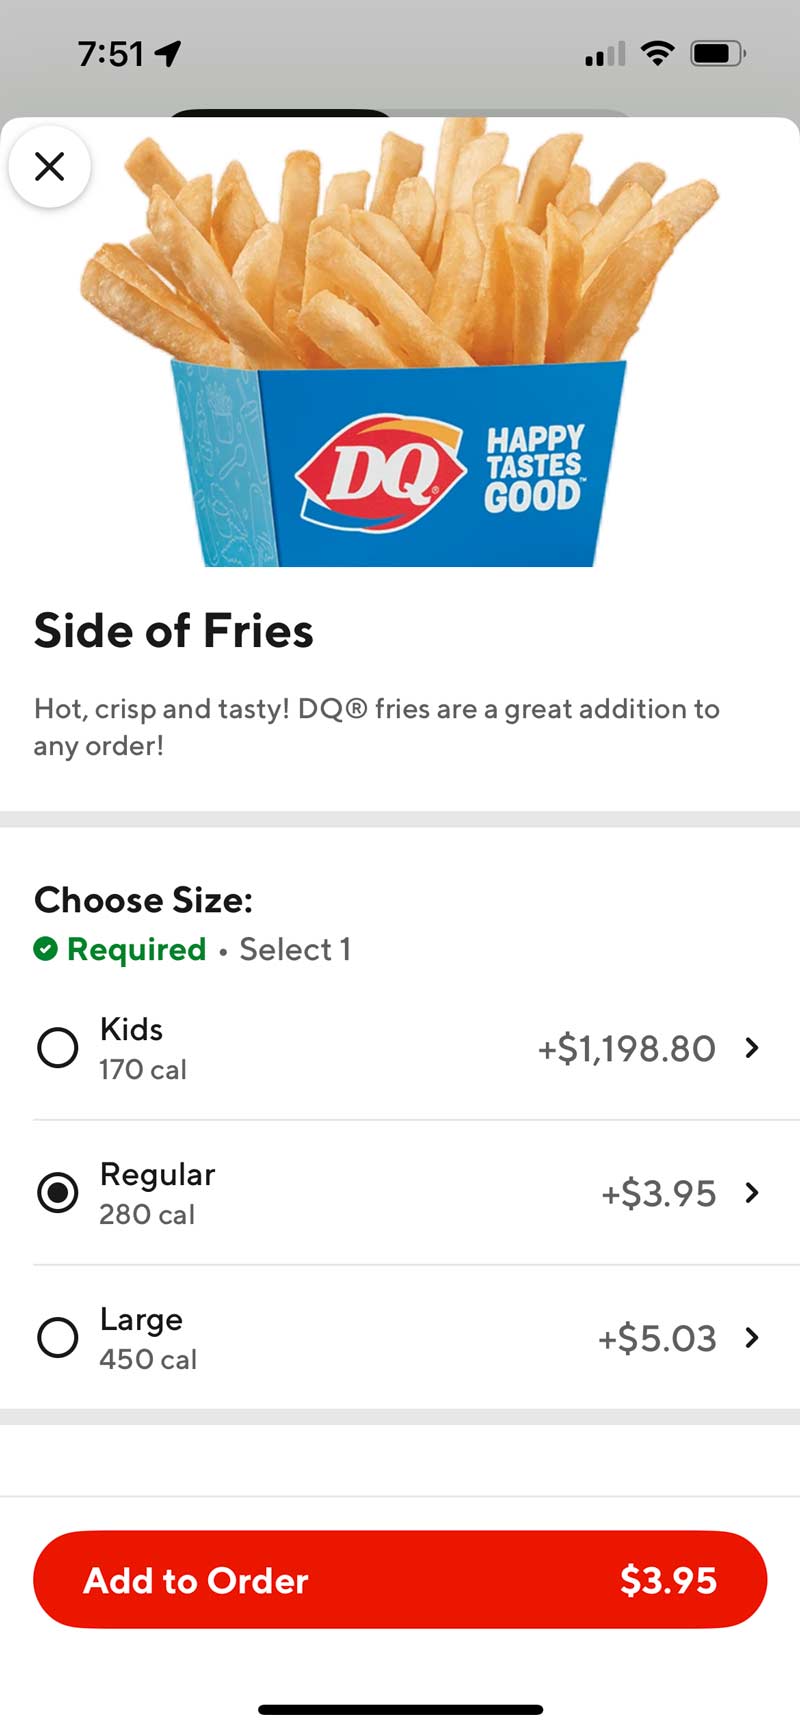 I think DoorDash might be going overboard with their fees